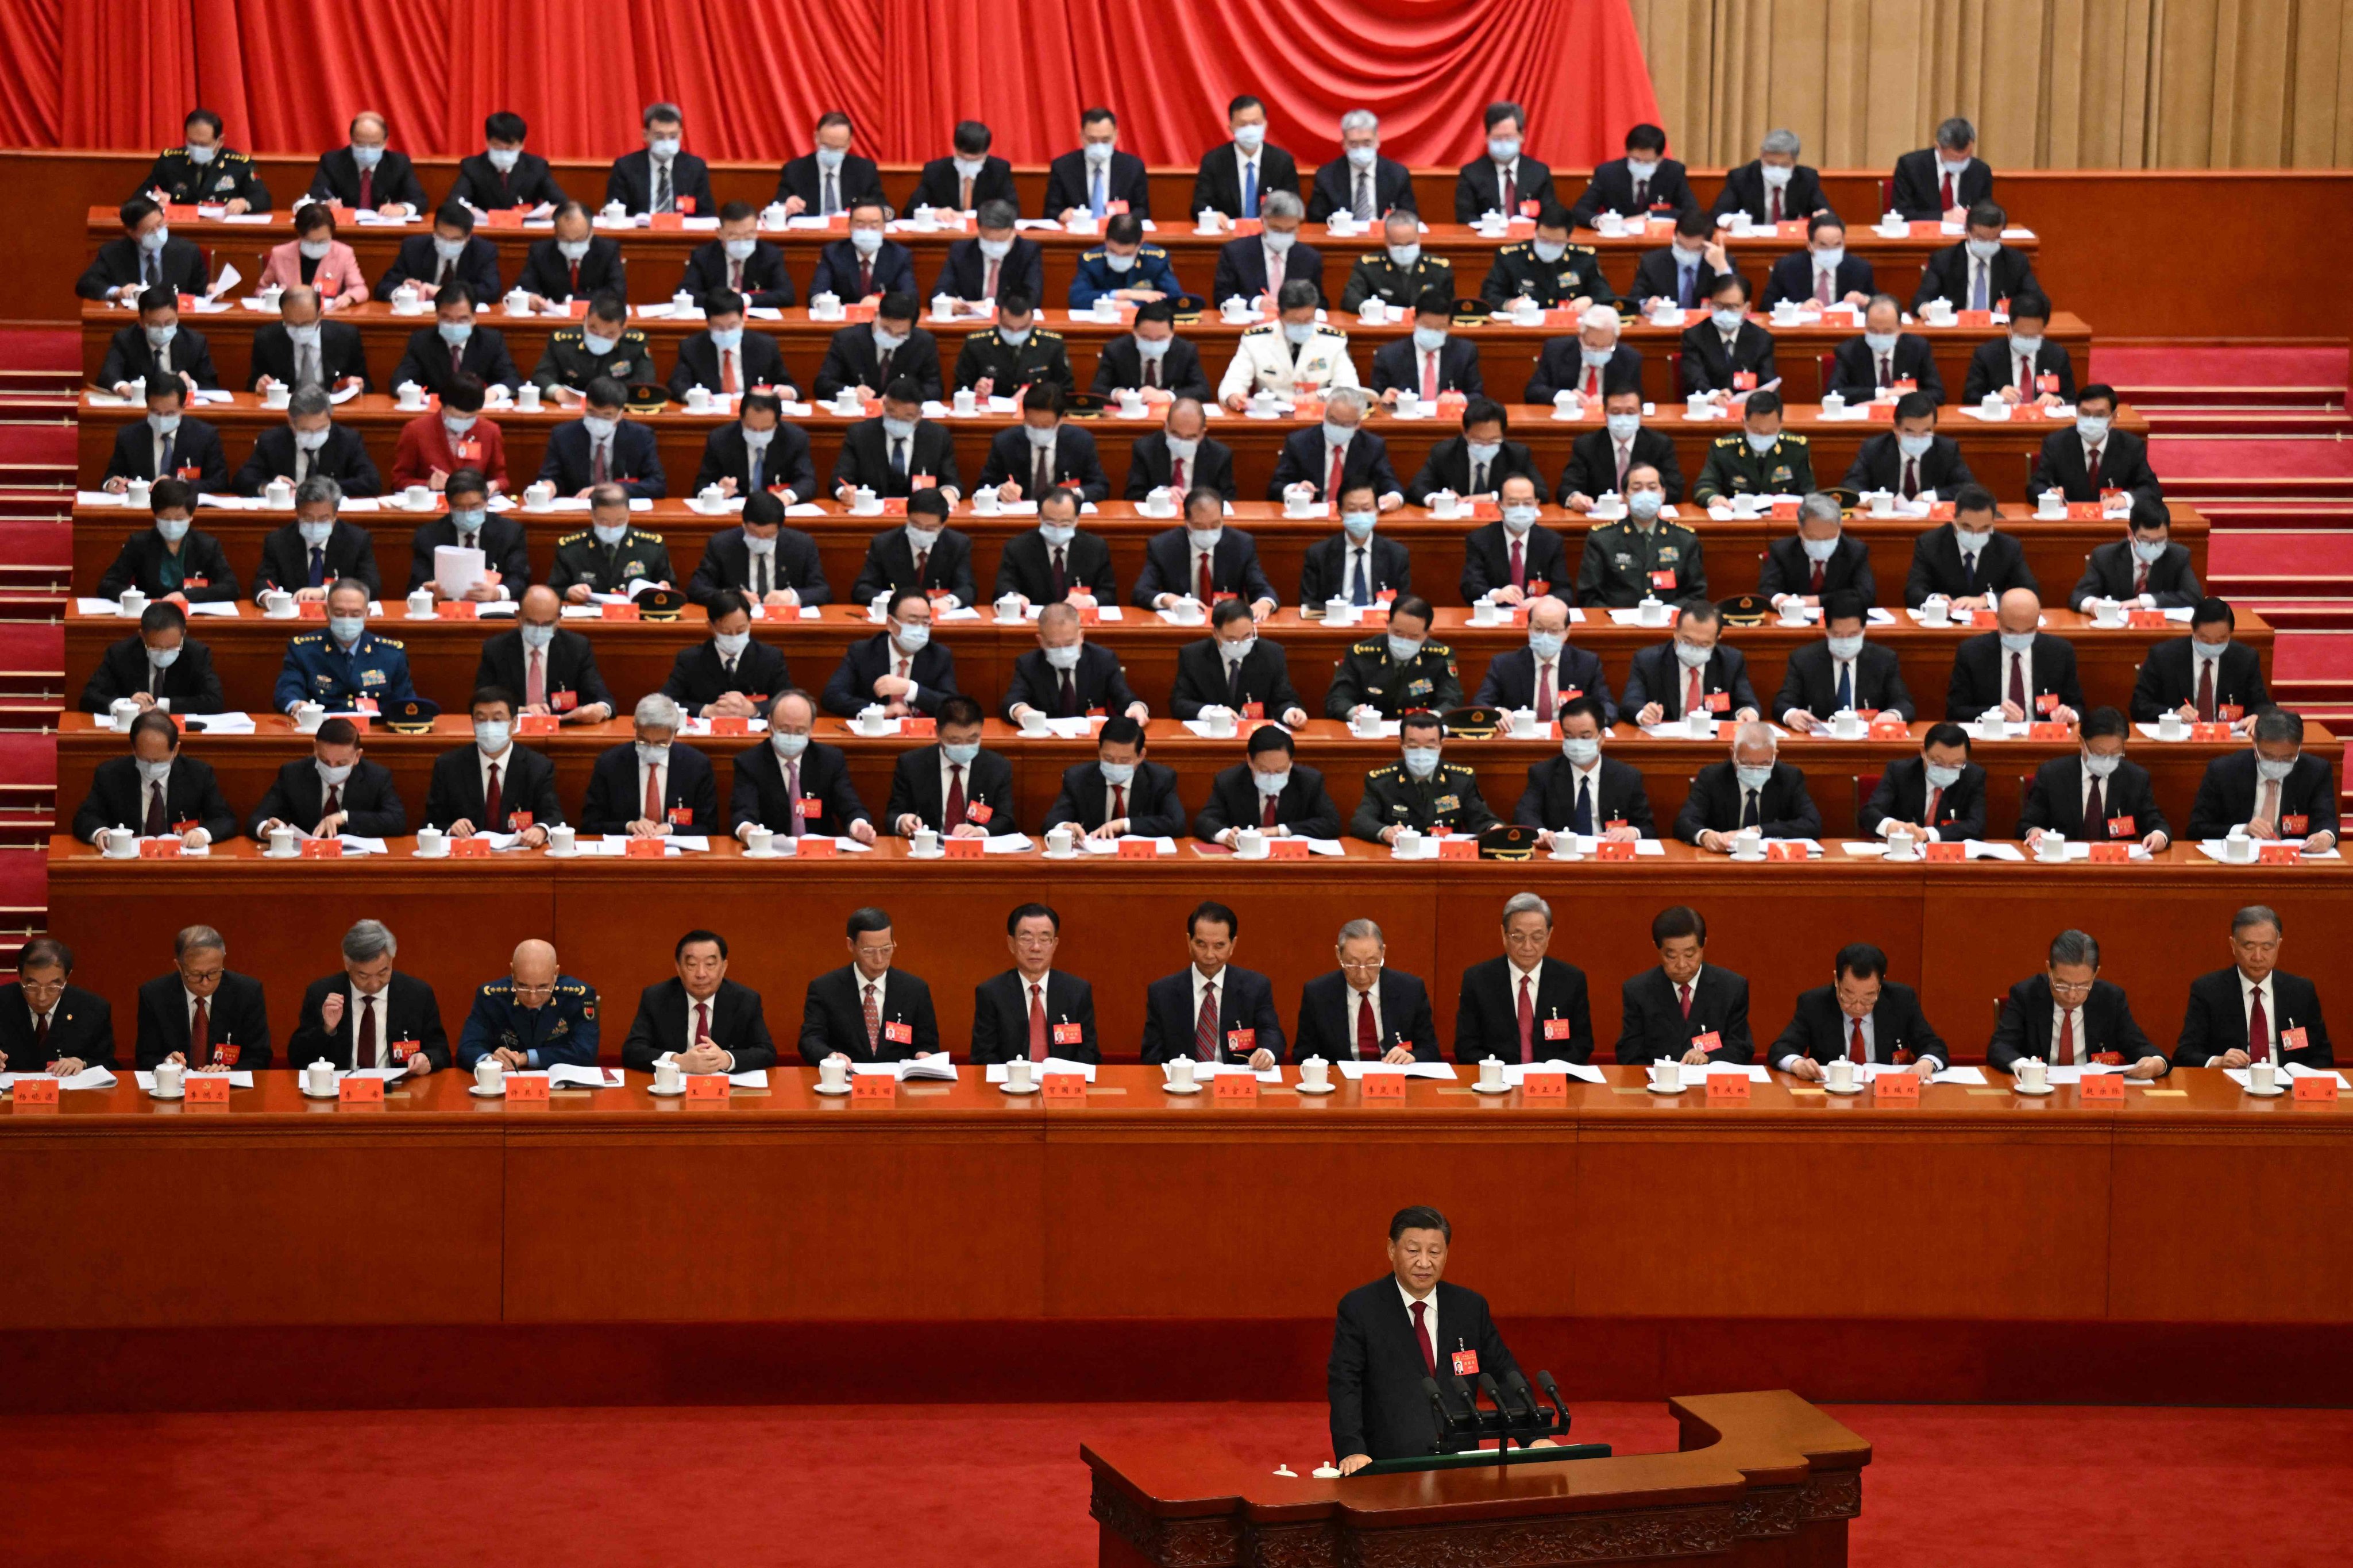 China’s biggest annual legislative event was shortened considerably during the pandemic. This year’s “two sessions” appear to be sticking to a compressed schedule. Photo: AFP